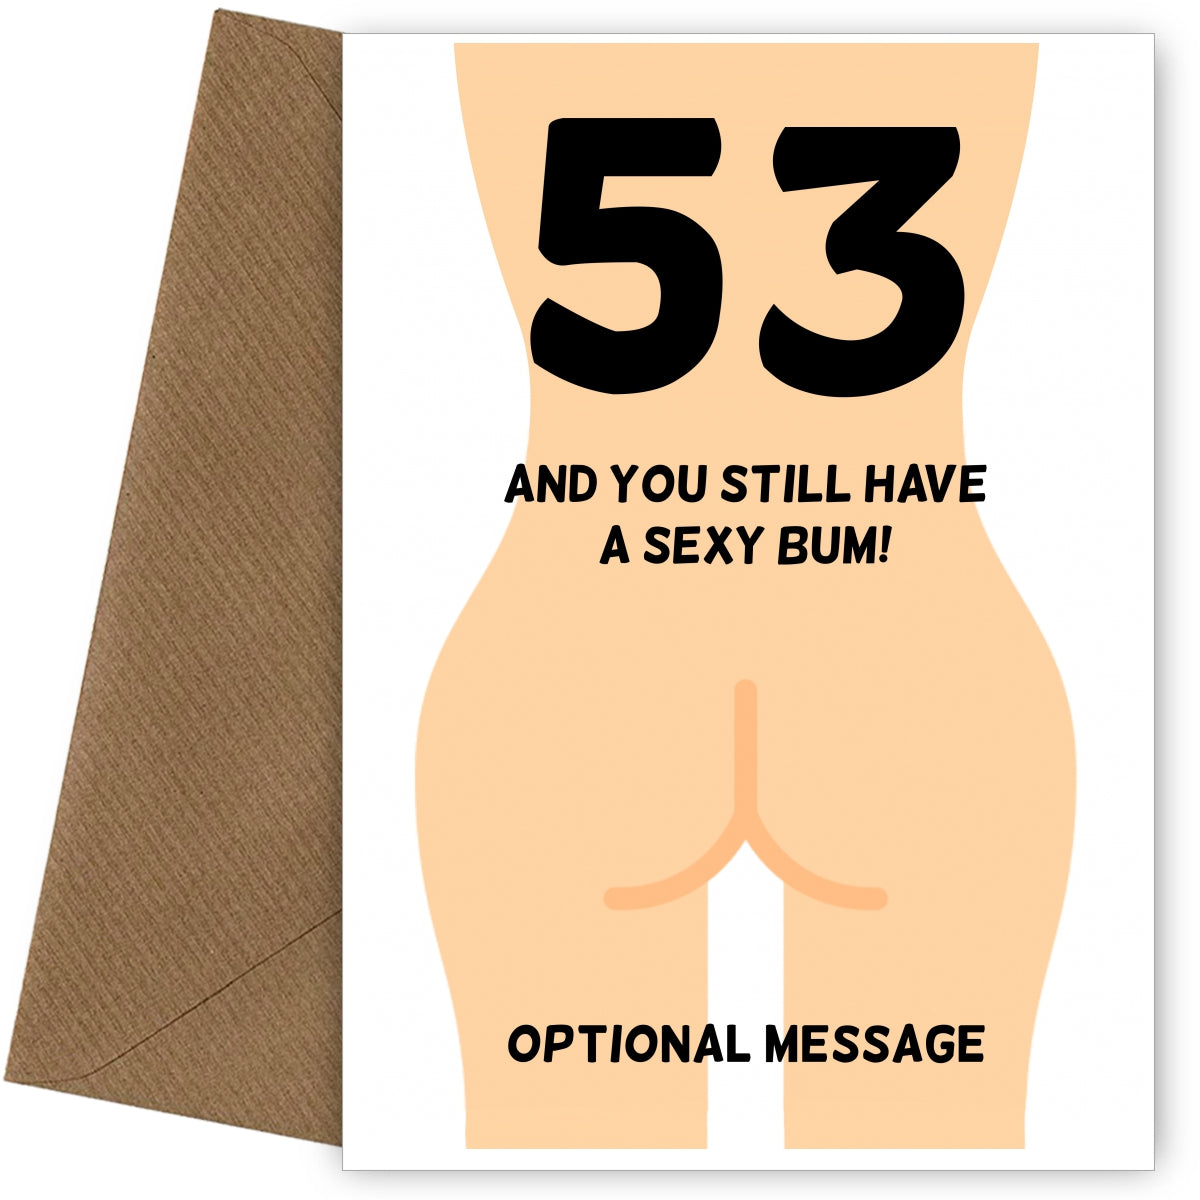 Happy 53rd Birthday Card - 53 and Still Have a Sexy Bum!